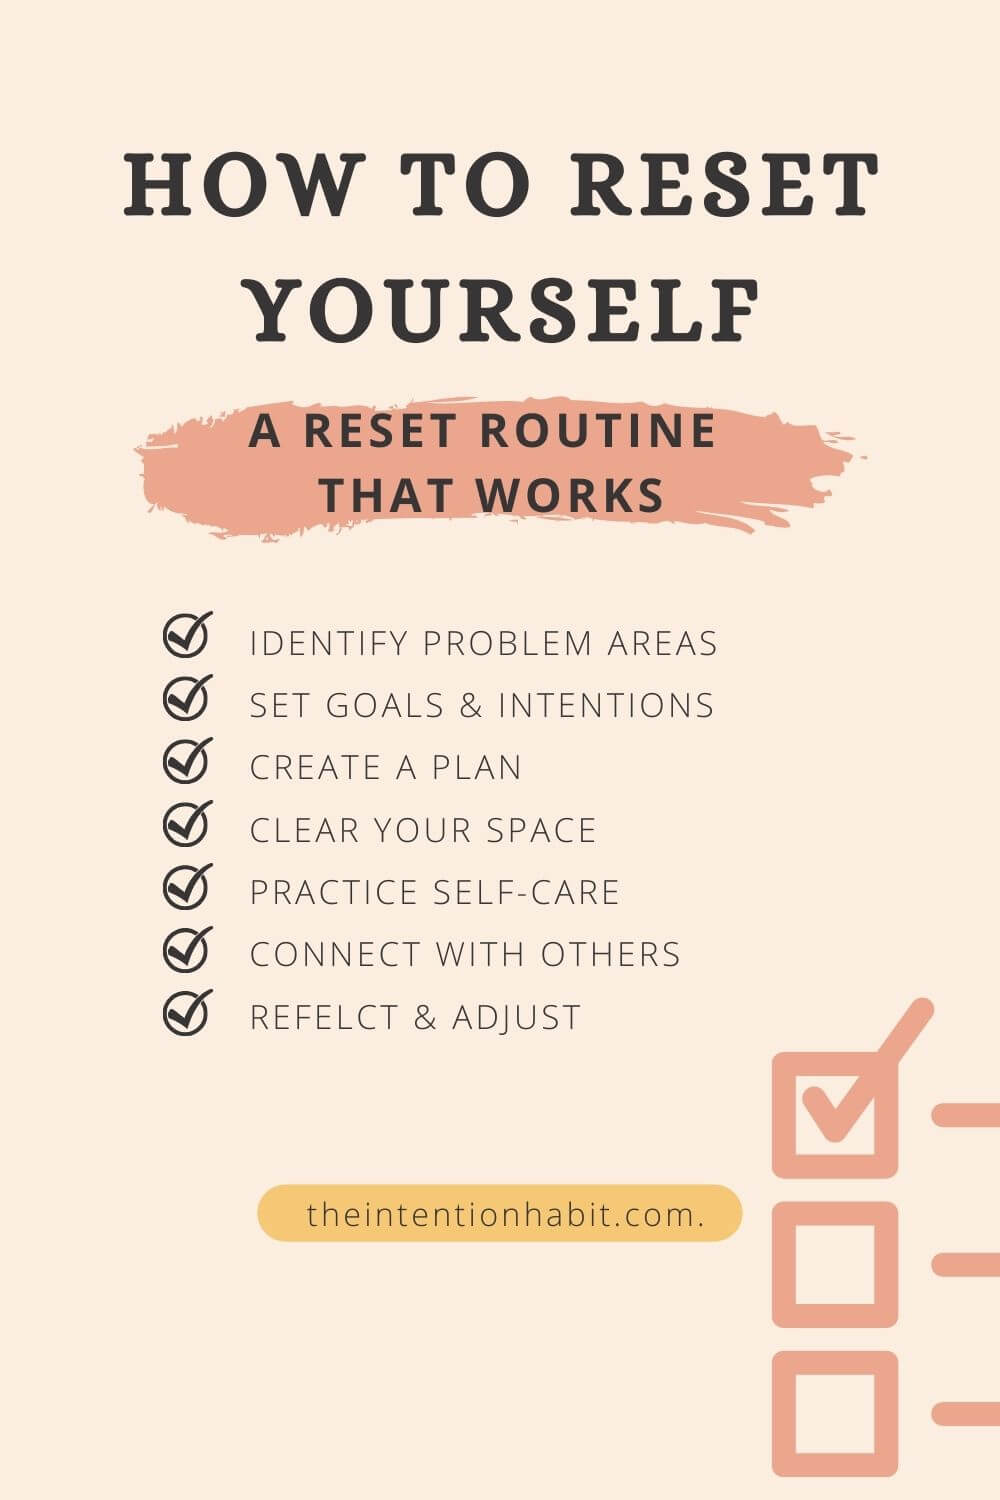 How to reset yourself checklist for a reset routine.